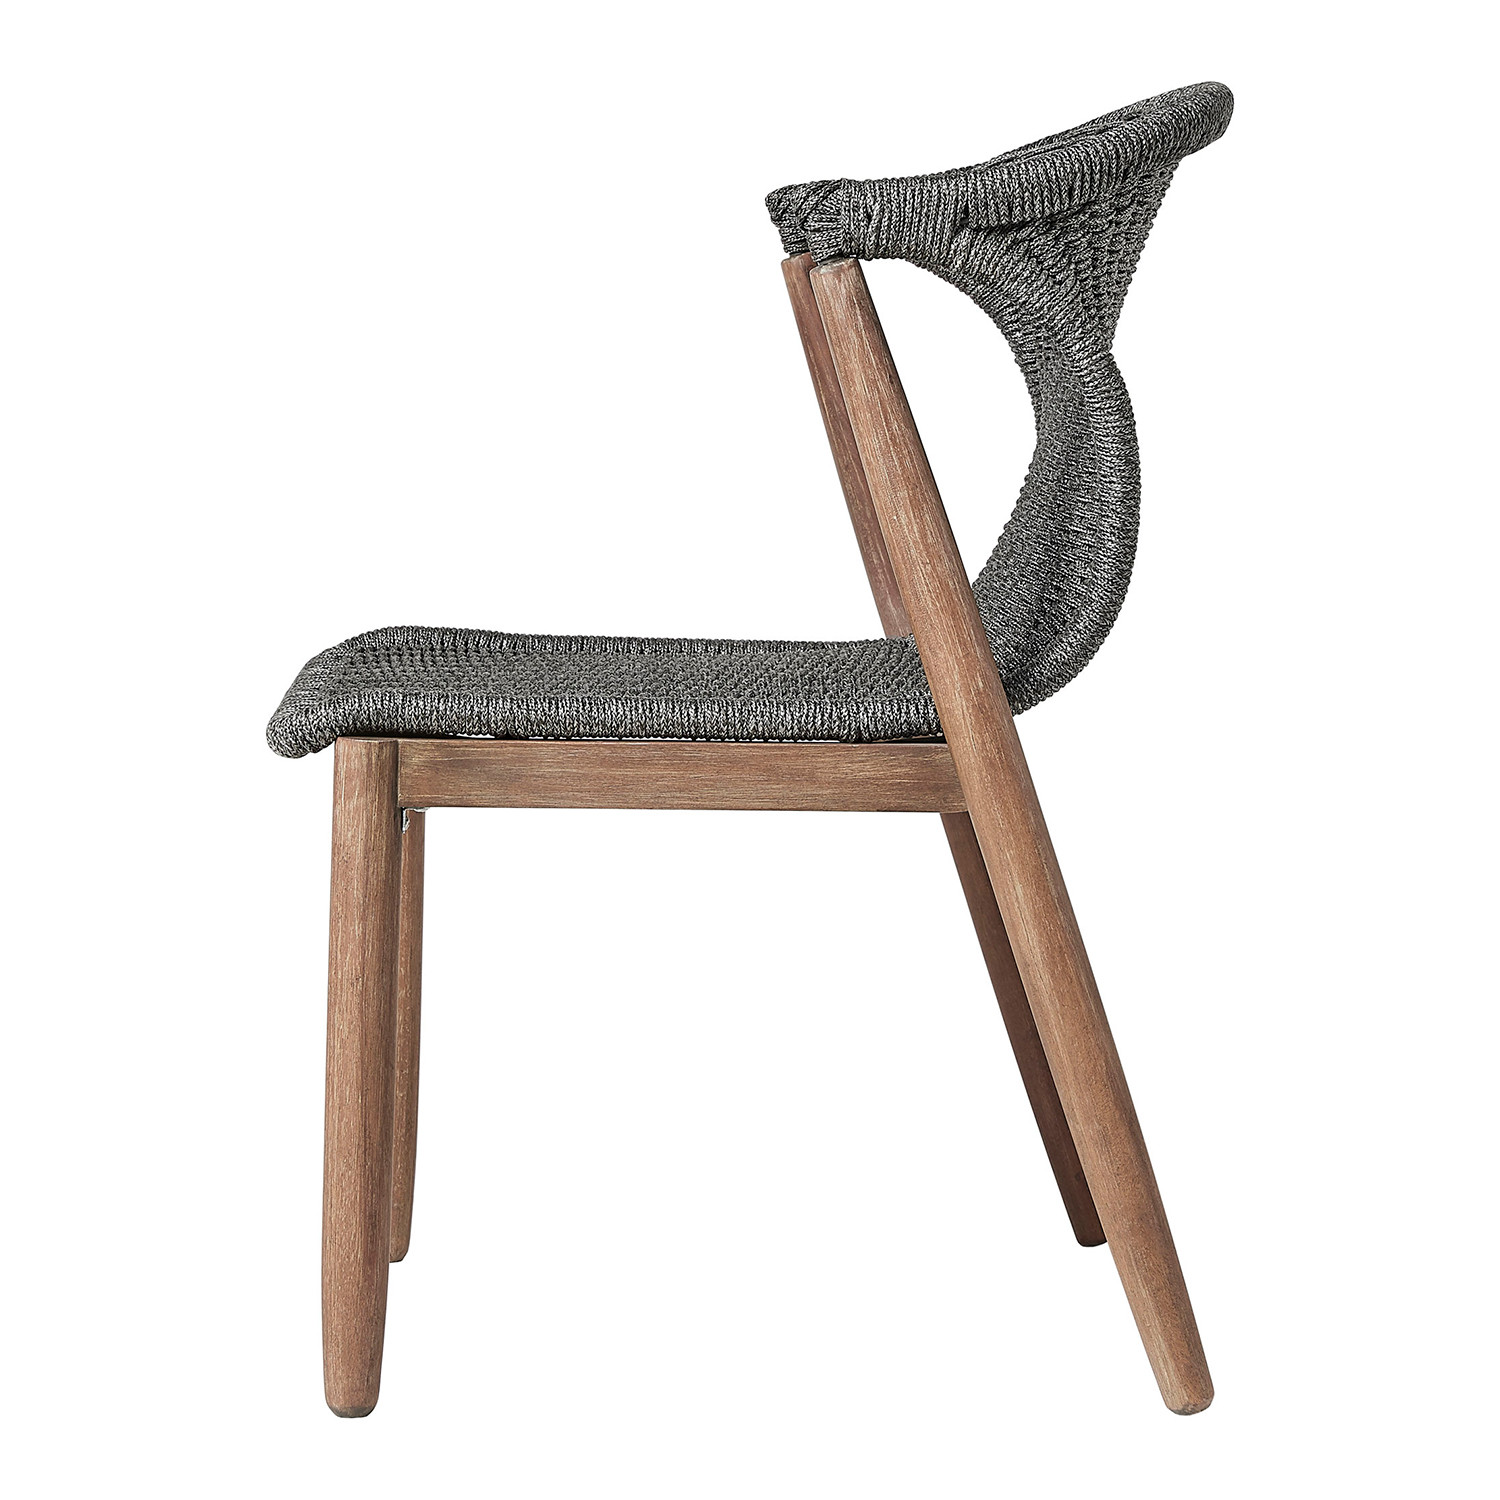 Embras Stacking Dining Chair // Set of 4 (Gray Cord + Weathered ...
